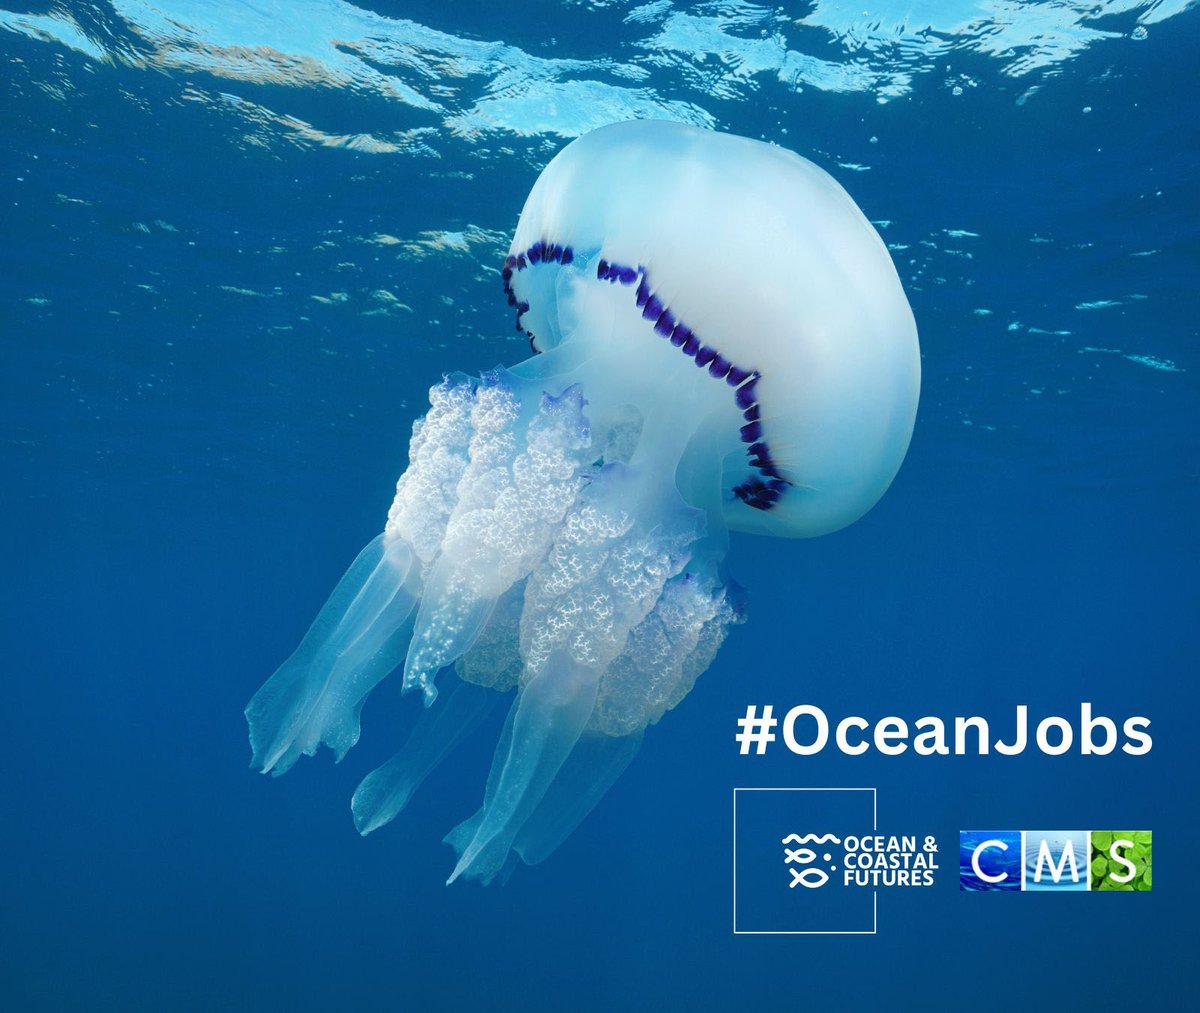 Be the first to hear about new Ocean & Coastal Job Opportunities Sign up for the OCF/CMS direct email job alerts here 👉bit.ly/3MiyV7i Find pages of new jobs here 👉cmscoms.com/?cat=35 #MarineJobs #OceanJobs #OceanCareers #CoastJobs #OceanJob #ConservationJobs